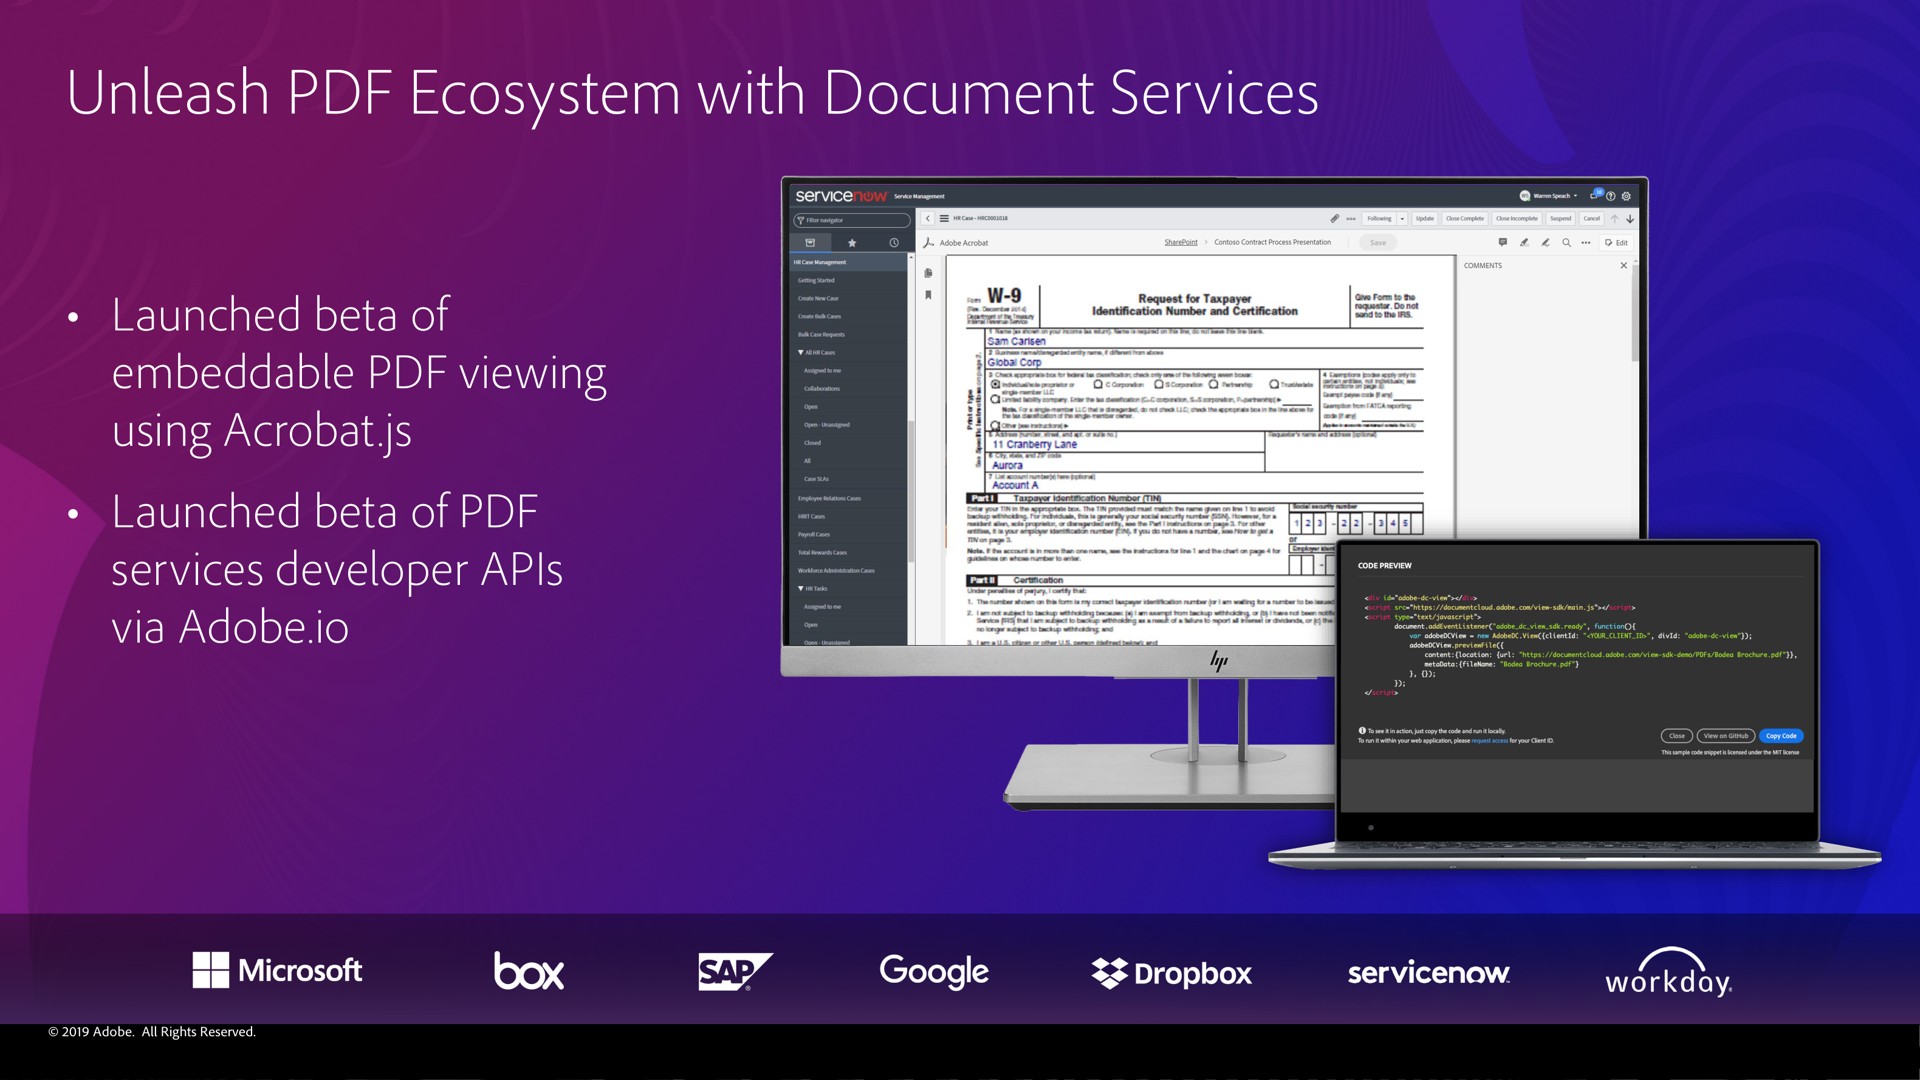 unleash ecosystem with document services | Adobe